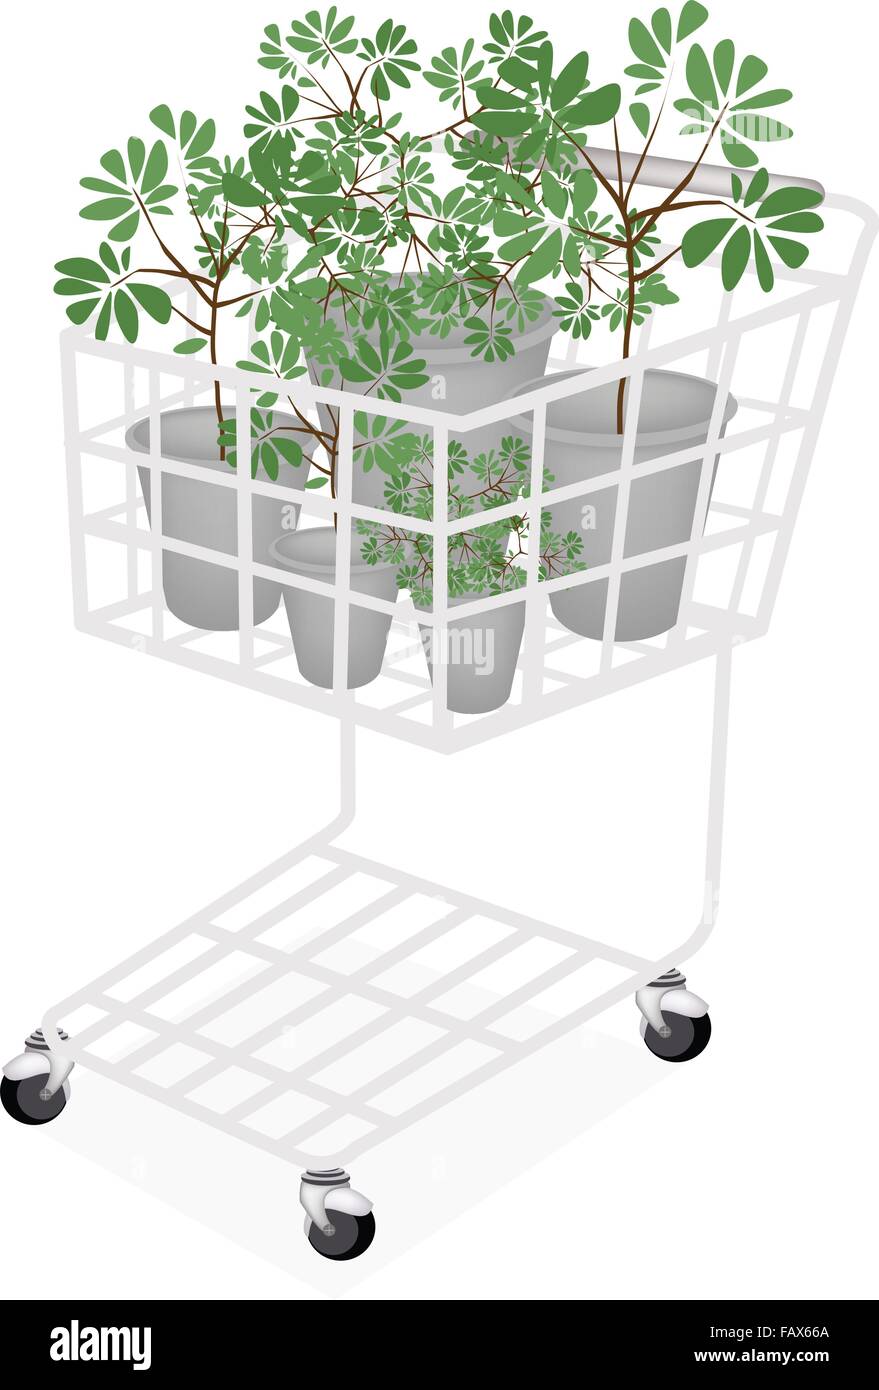 Tree and Plant, A Shopping Cart Full with Terminalia Ivorensis Trees in Flowerpot for Garden Decoration. Stock Vector